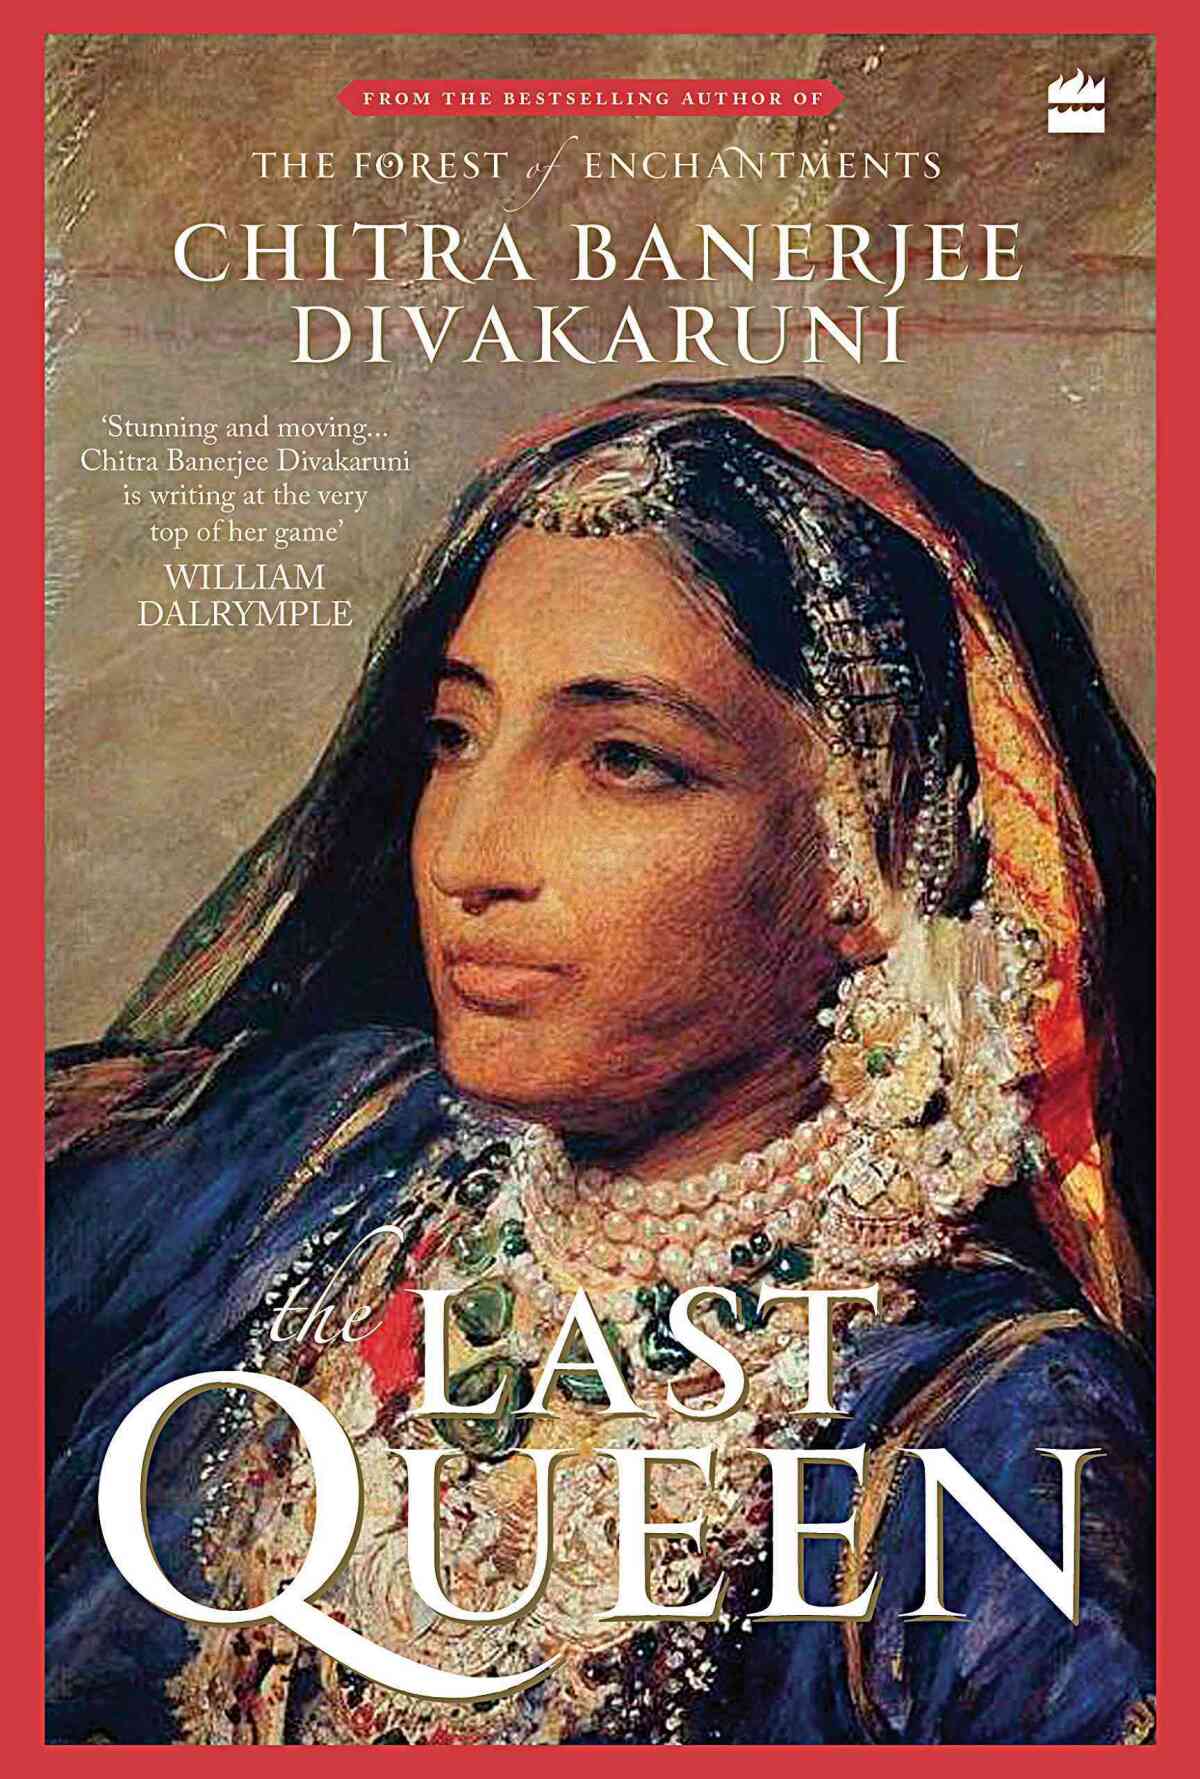 The cover of the Indian edition of "The Last Queen," by Chitra Divarakaruni.